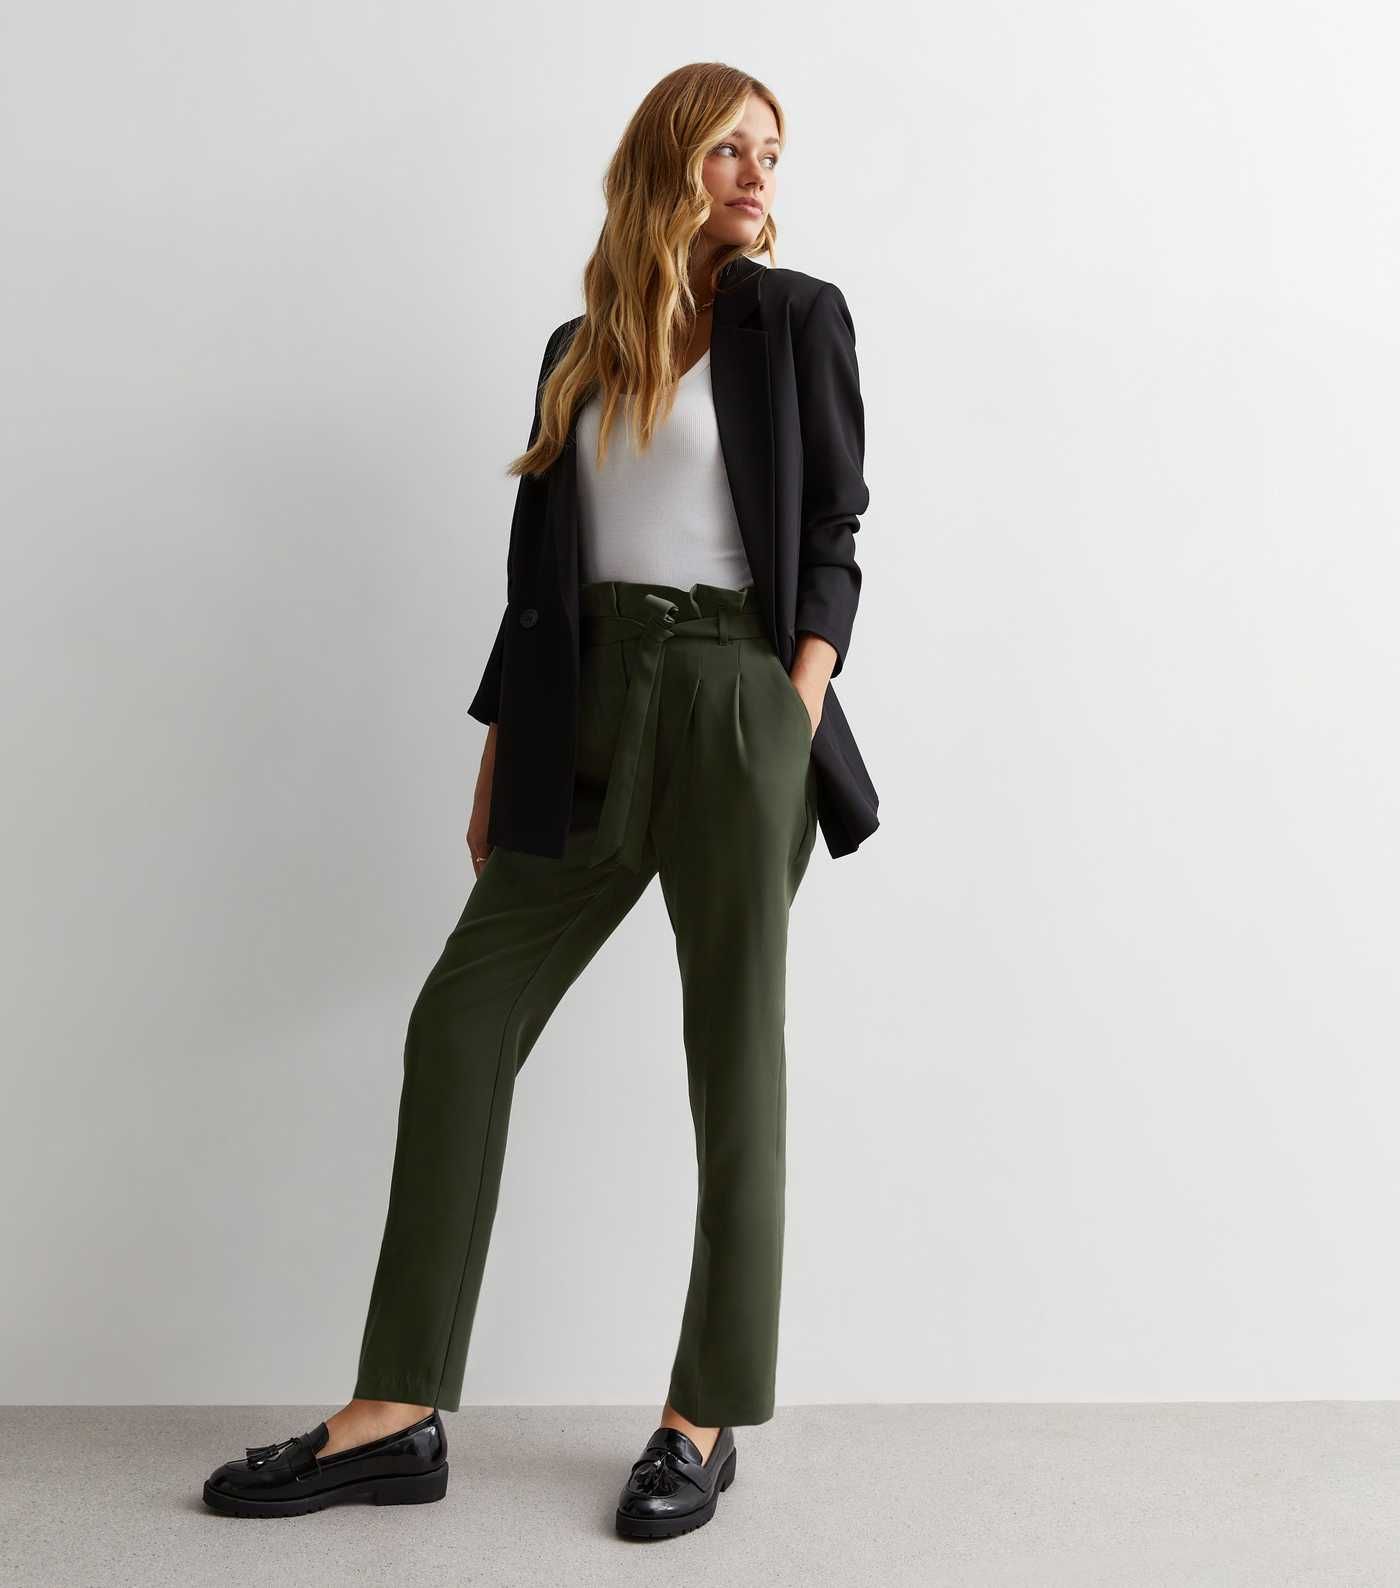 Khaki High Waist Paperbag Trousers
						
						Add to Saved Items
						Remove from Saved Items | New Look (UK)